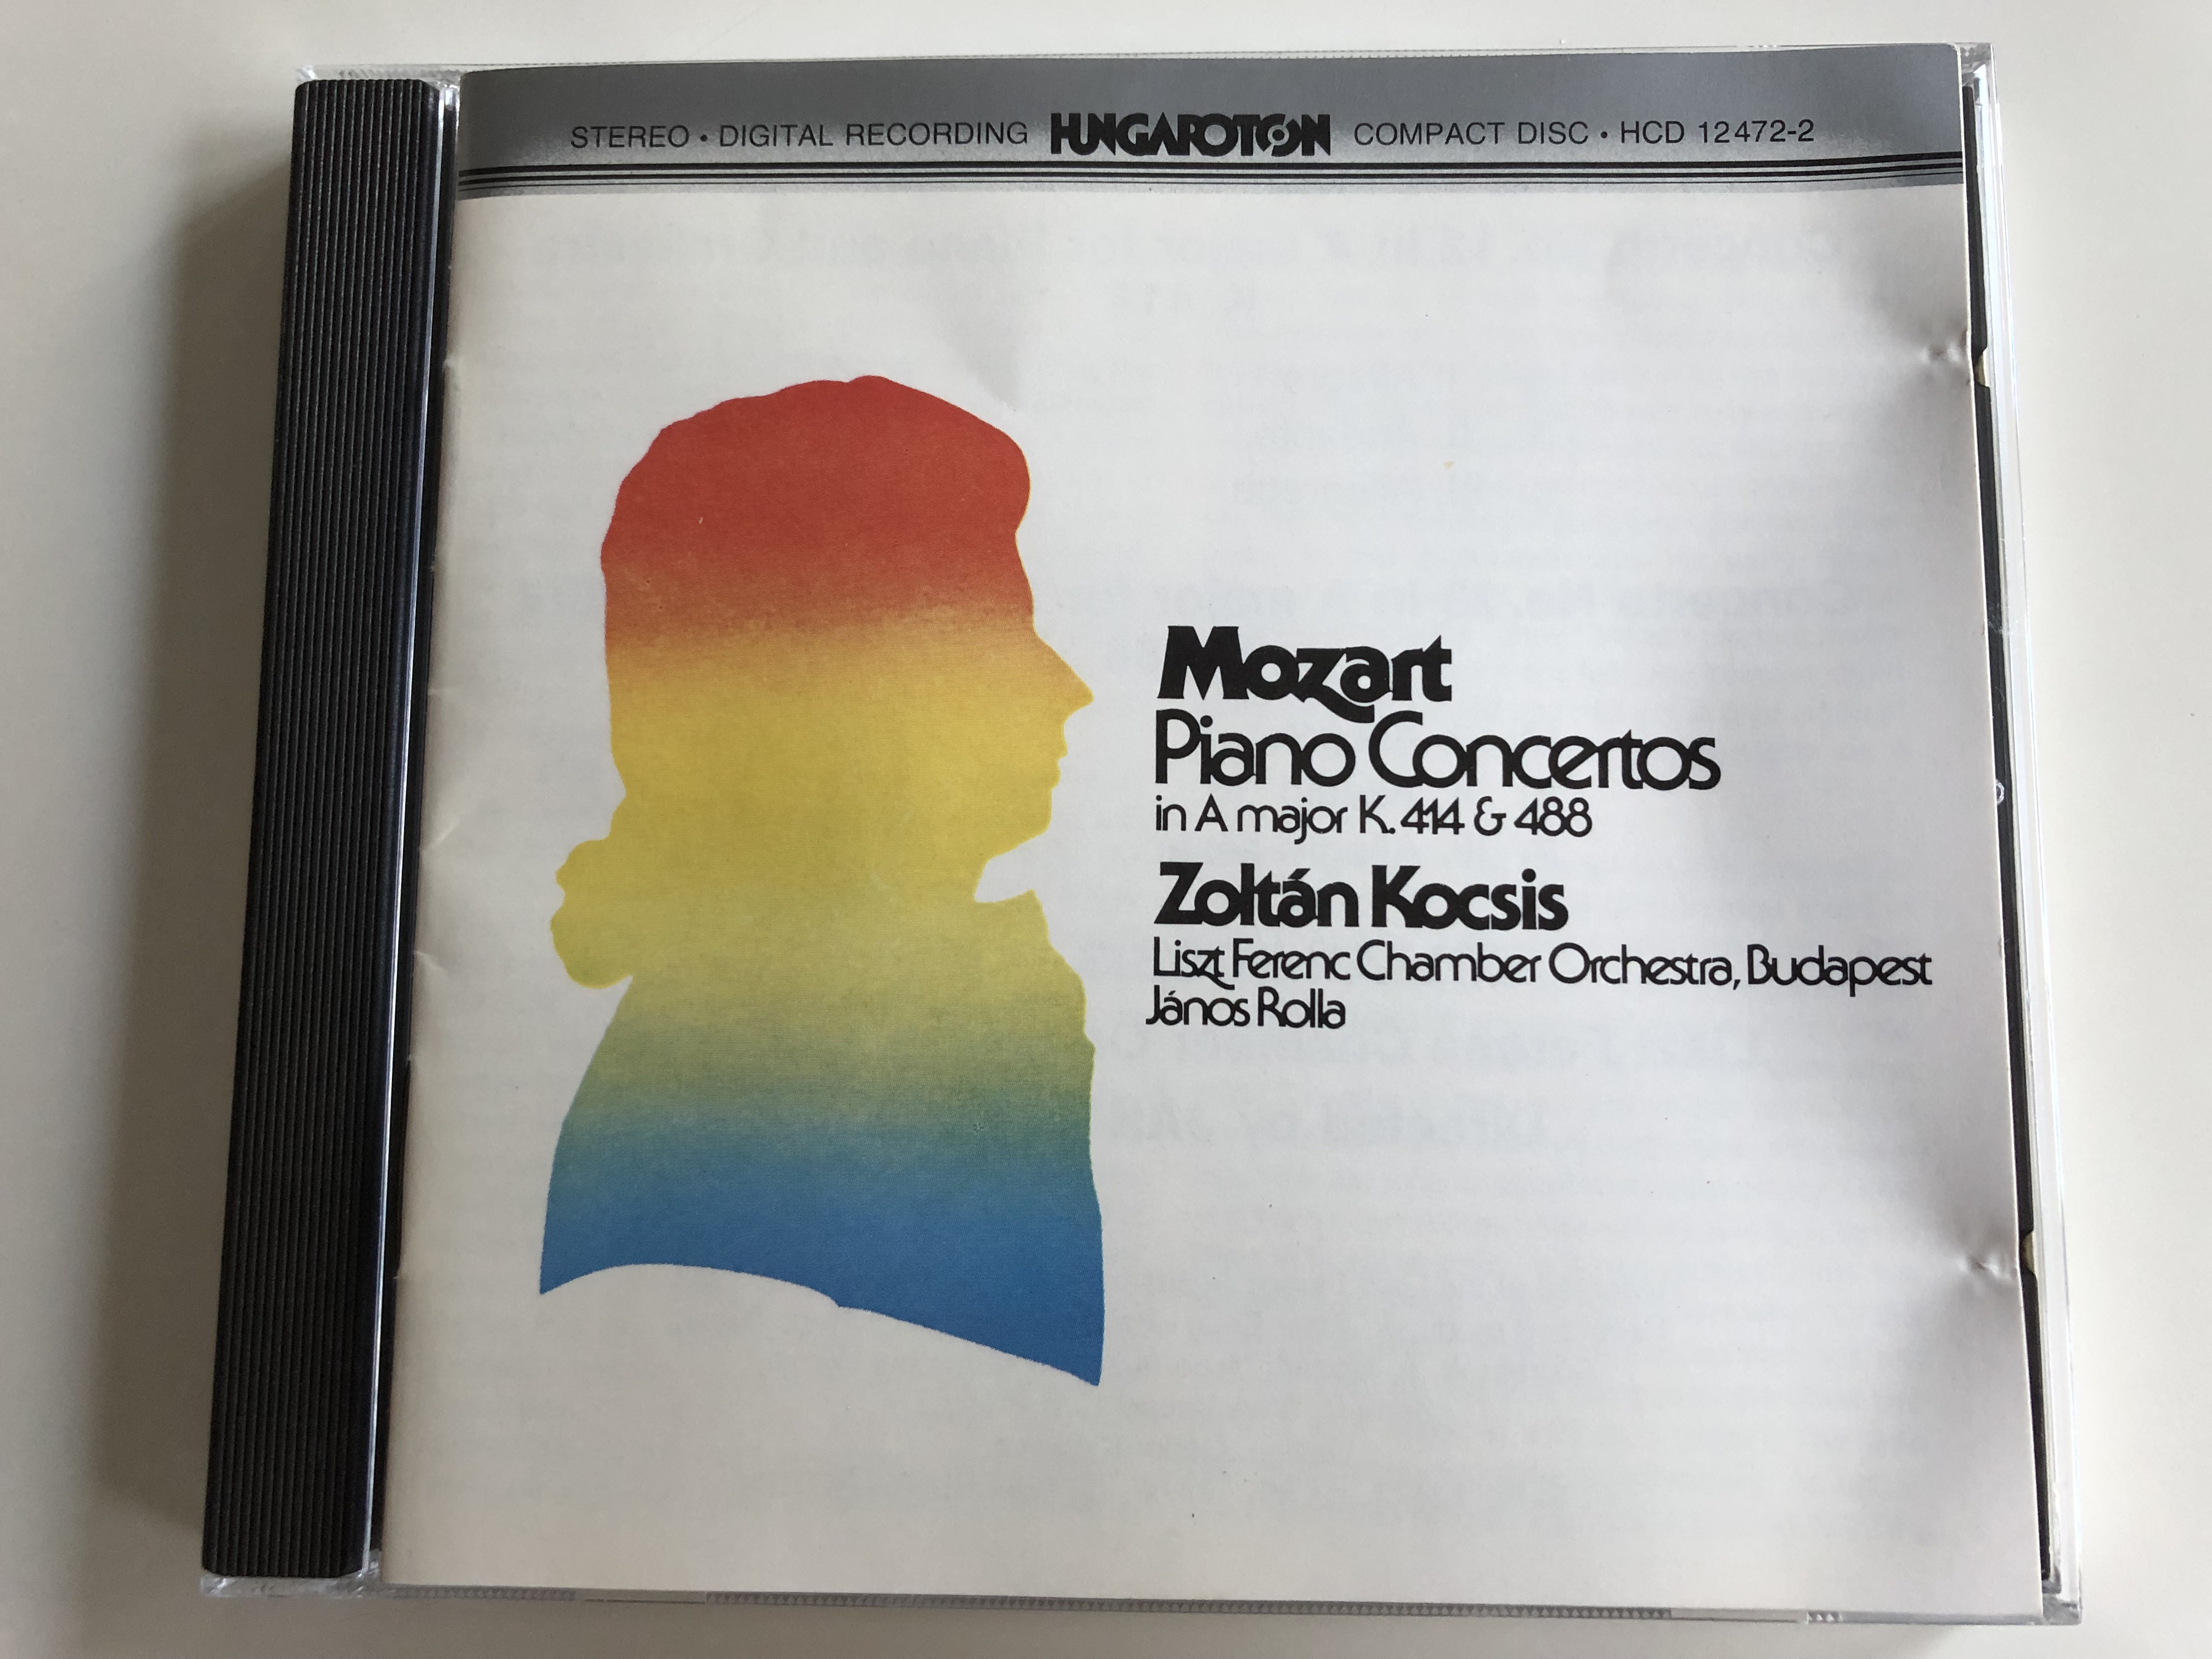 w.-a.-mozart-piano-concertos-in-a-major-k.414-488-zolt-n-kocsis-piano-liszt-ferenc-chamber-orchestra-conducted-by-j-nos-rolla-hungaroton-classic-audio-cd-1984-1-.jpg